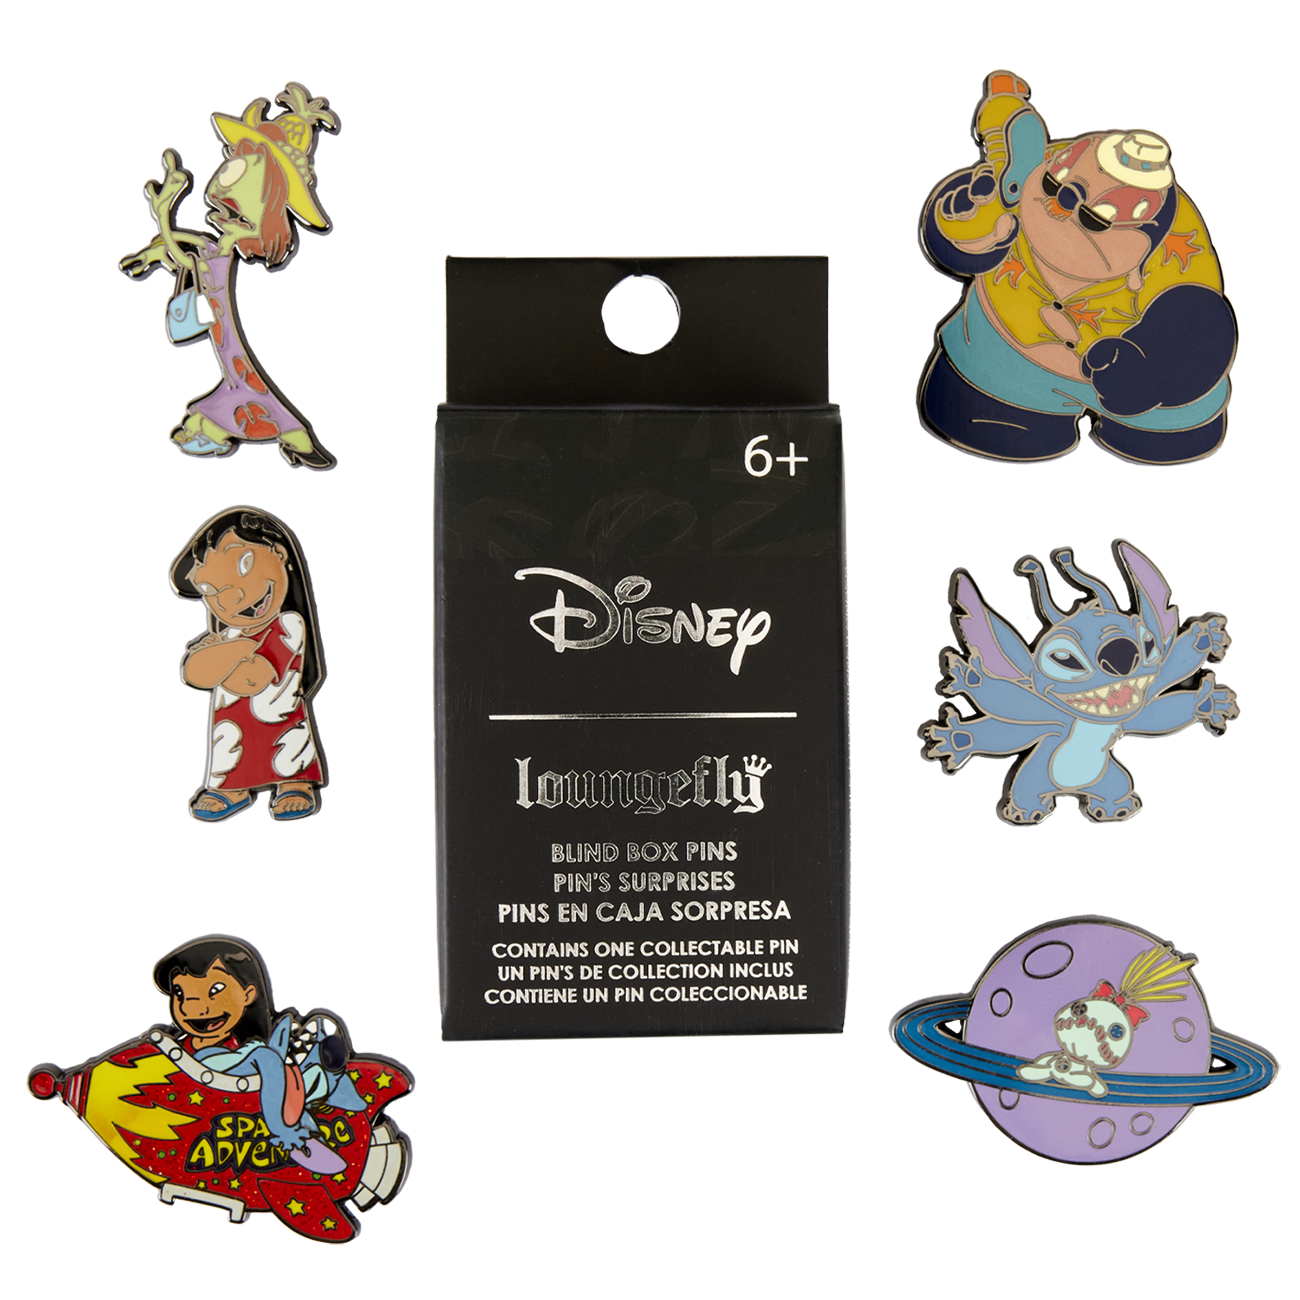 2nd Pin Trading Carnival 2019 HKDL Pin Releases - Disney Pins Blog